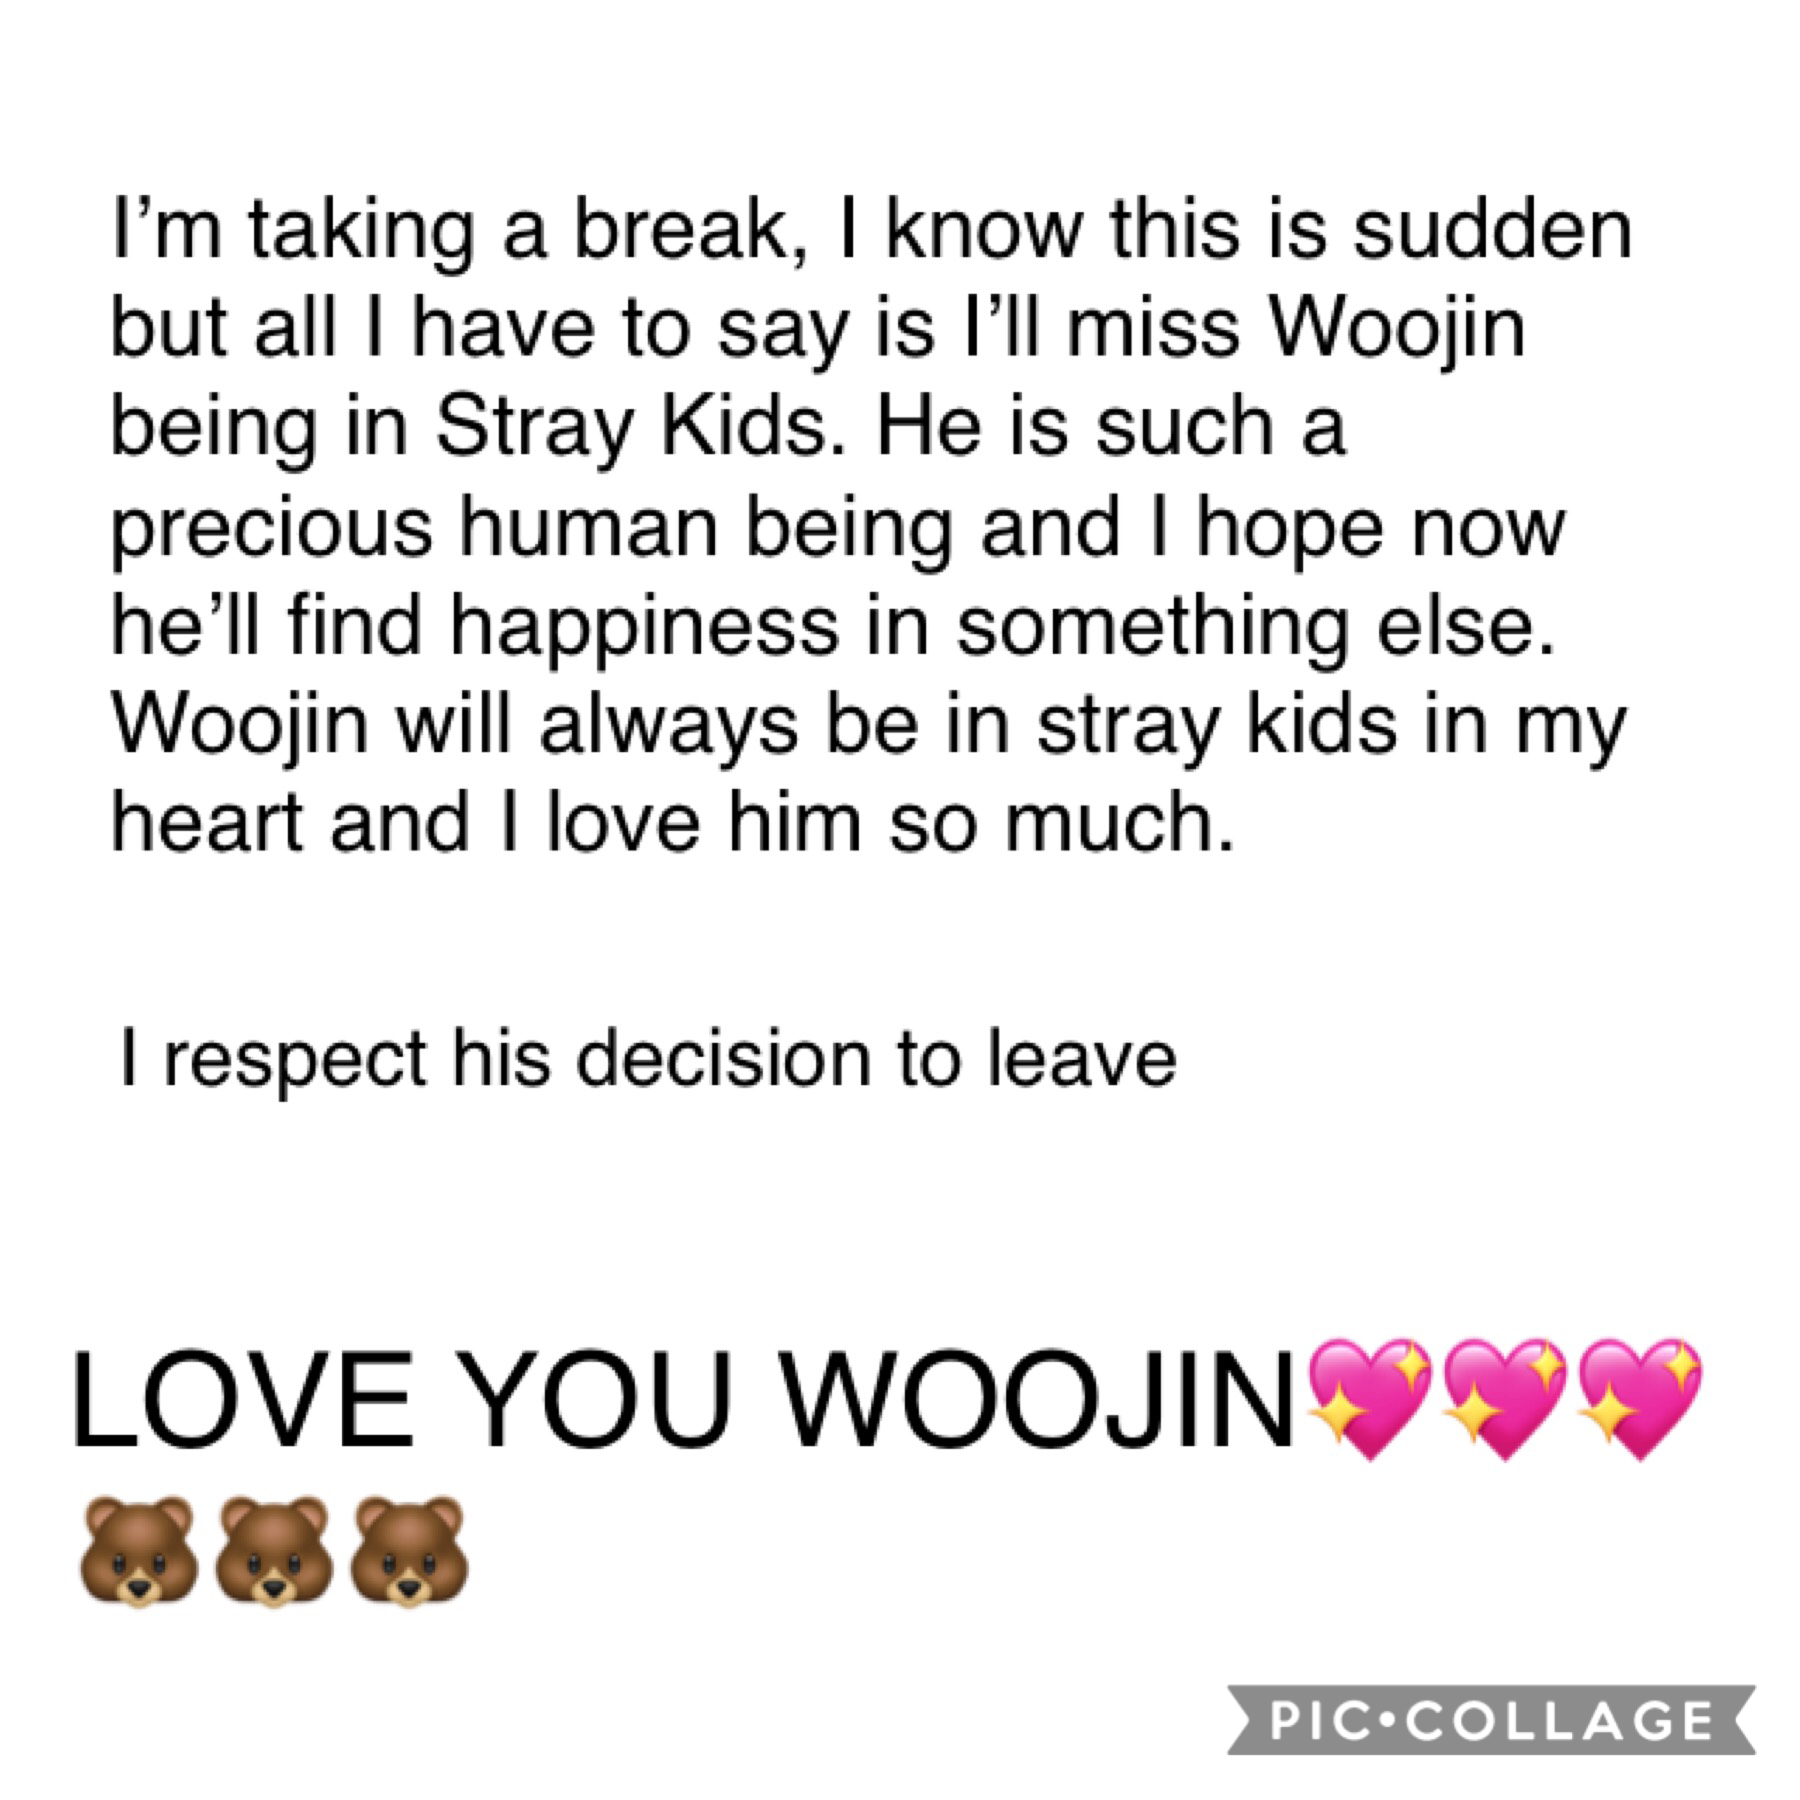 I’m literally going to cry, Woojin I love you